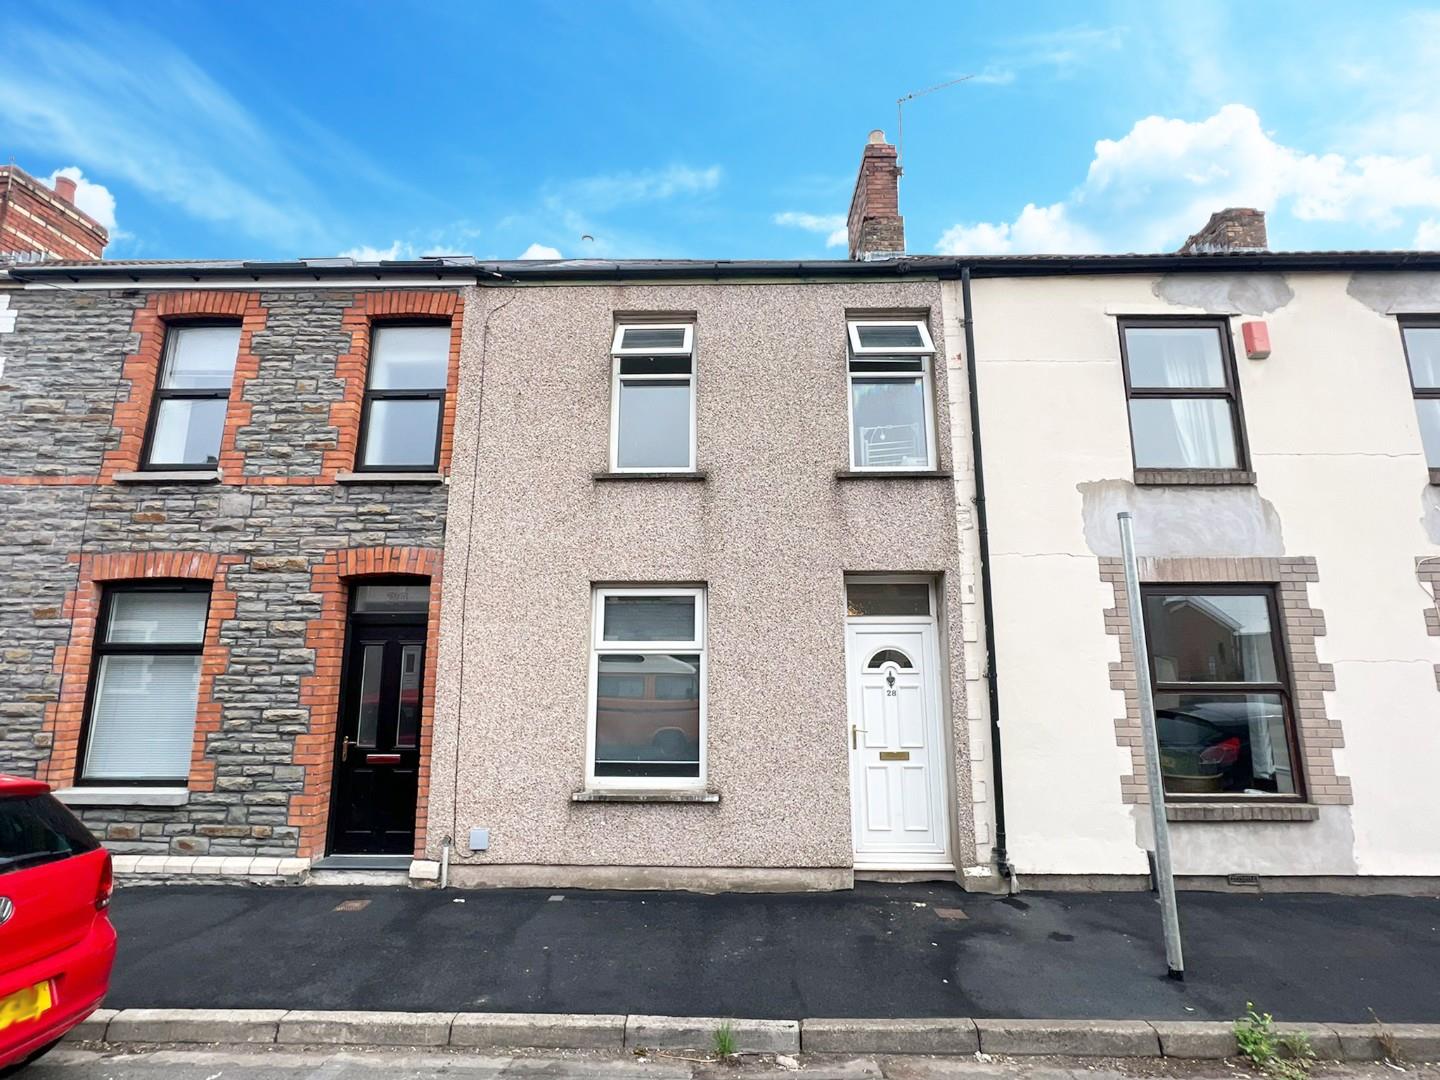 2 bed  for sale in Letty Street, Cardiff, CF24